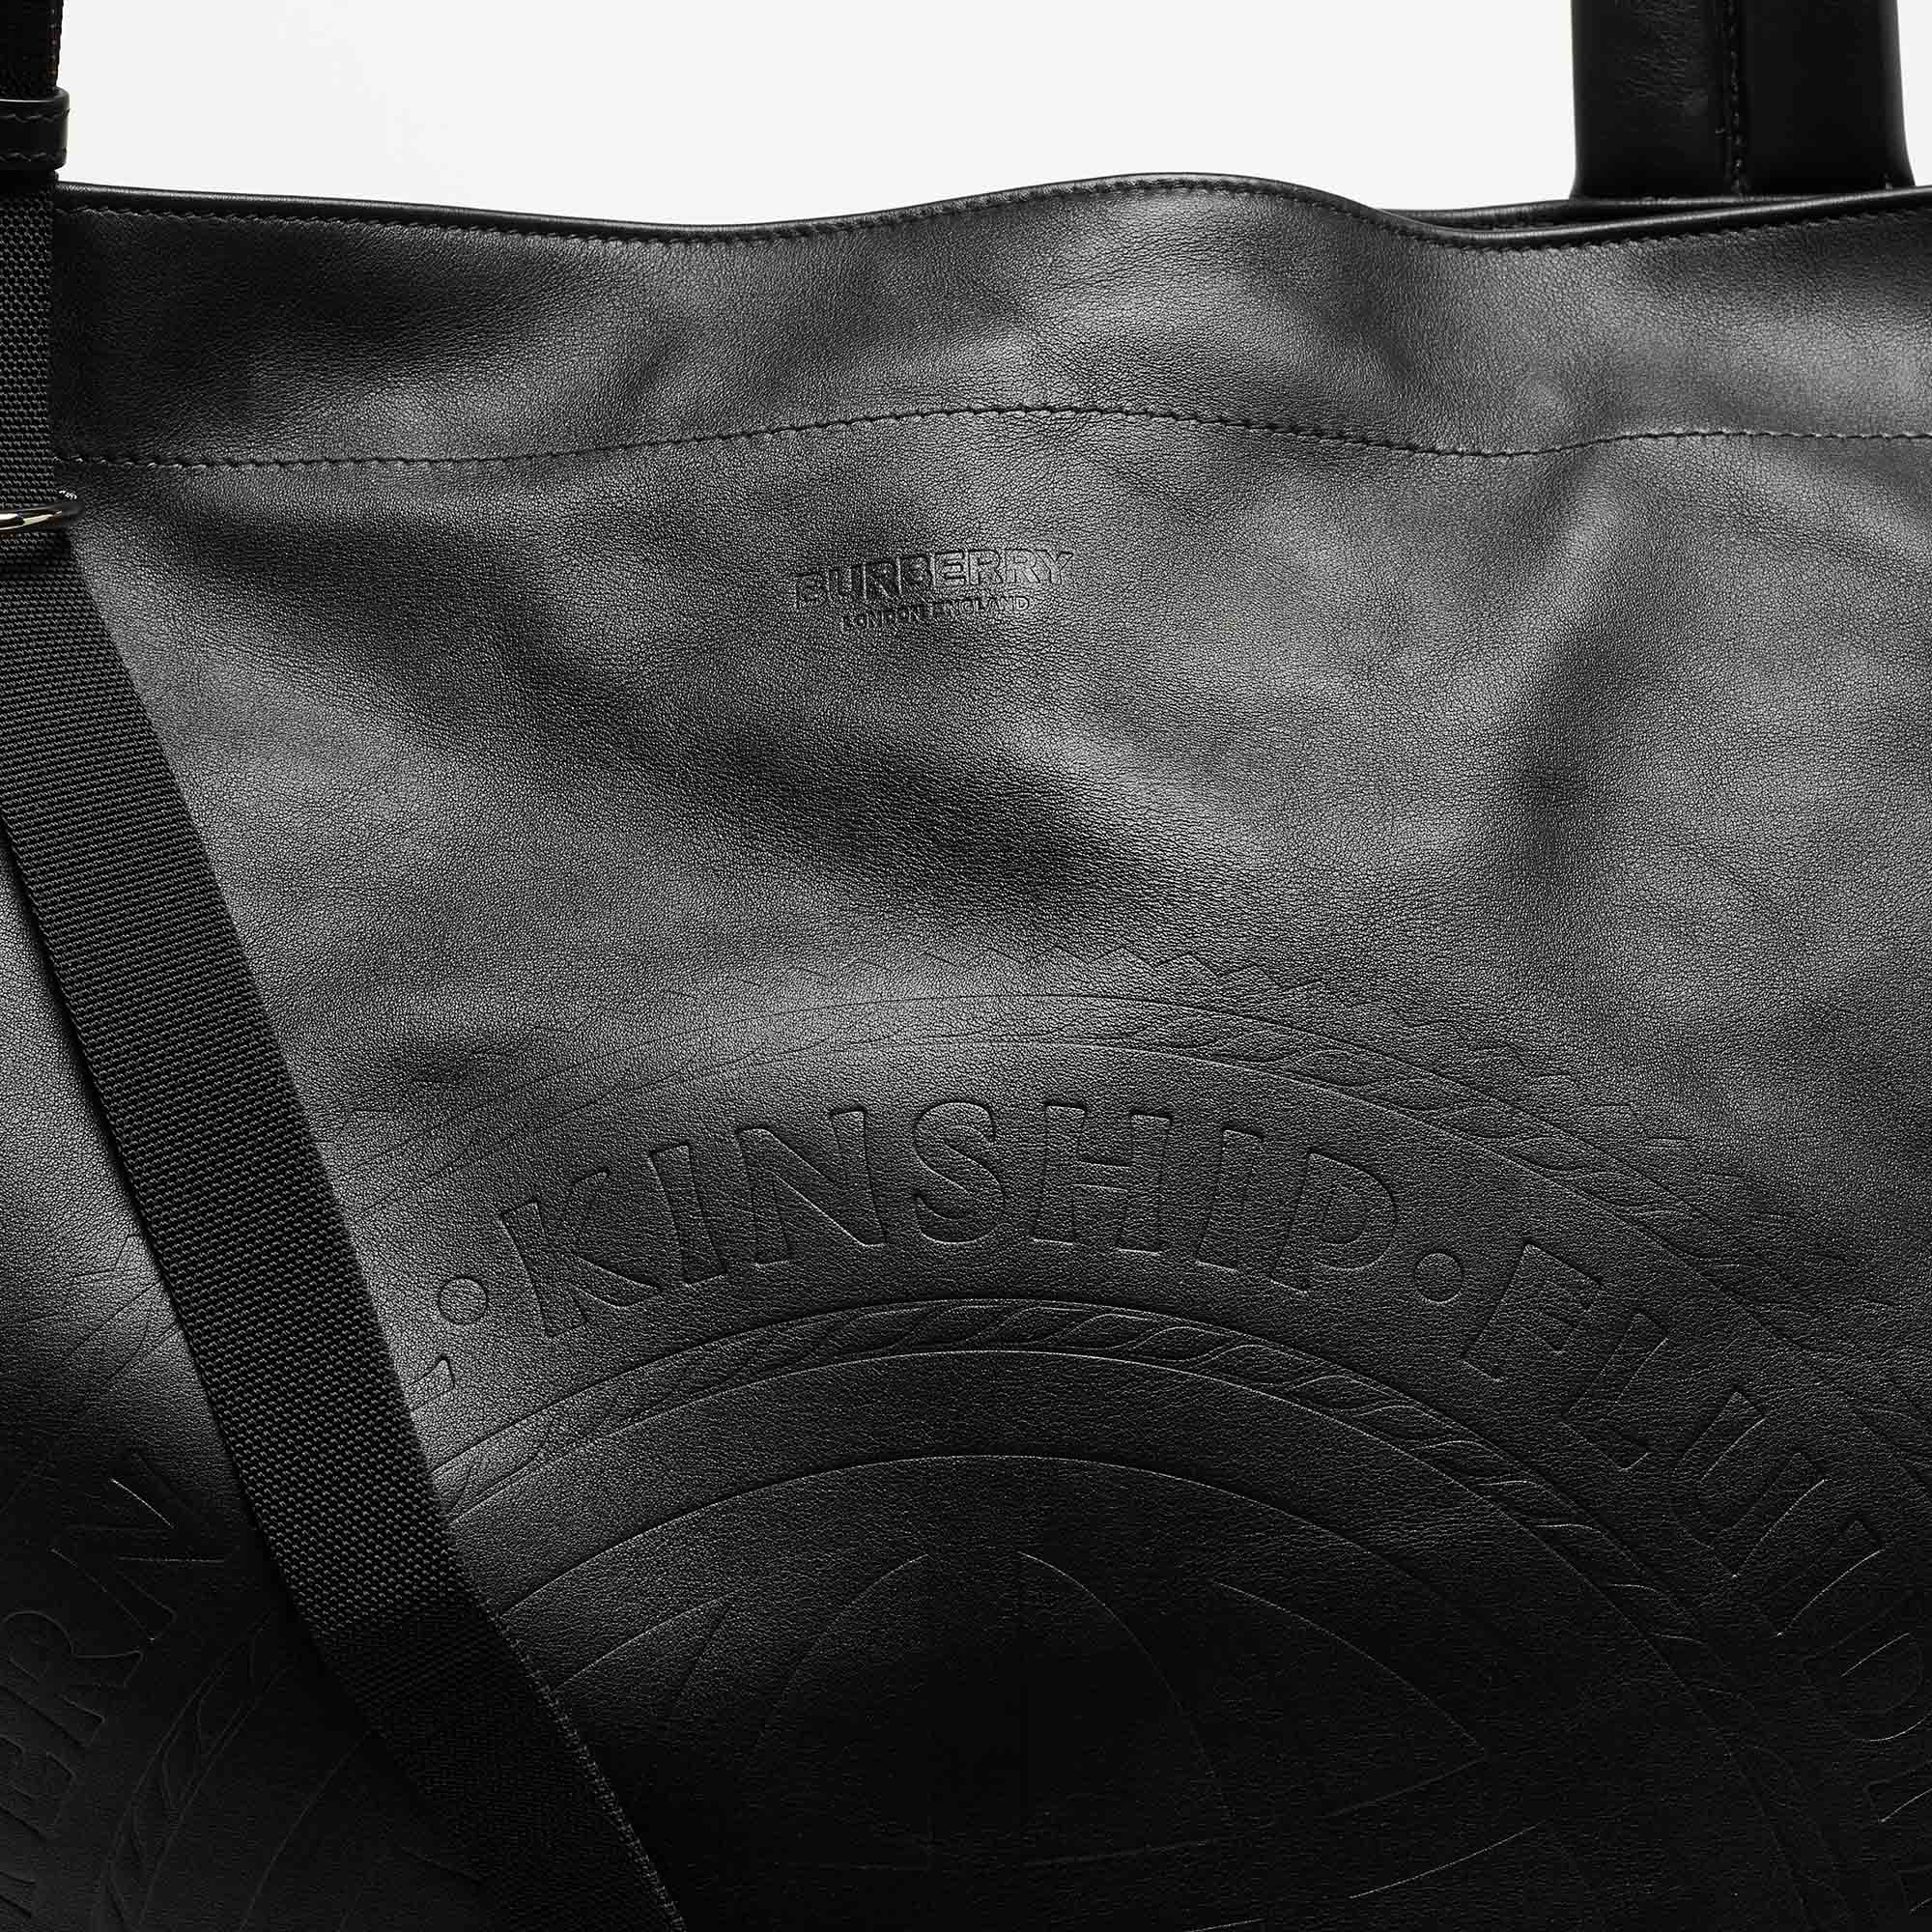 Burberry Black Embossed Leather New Flat Bag